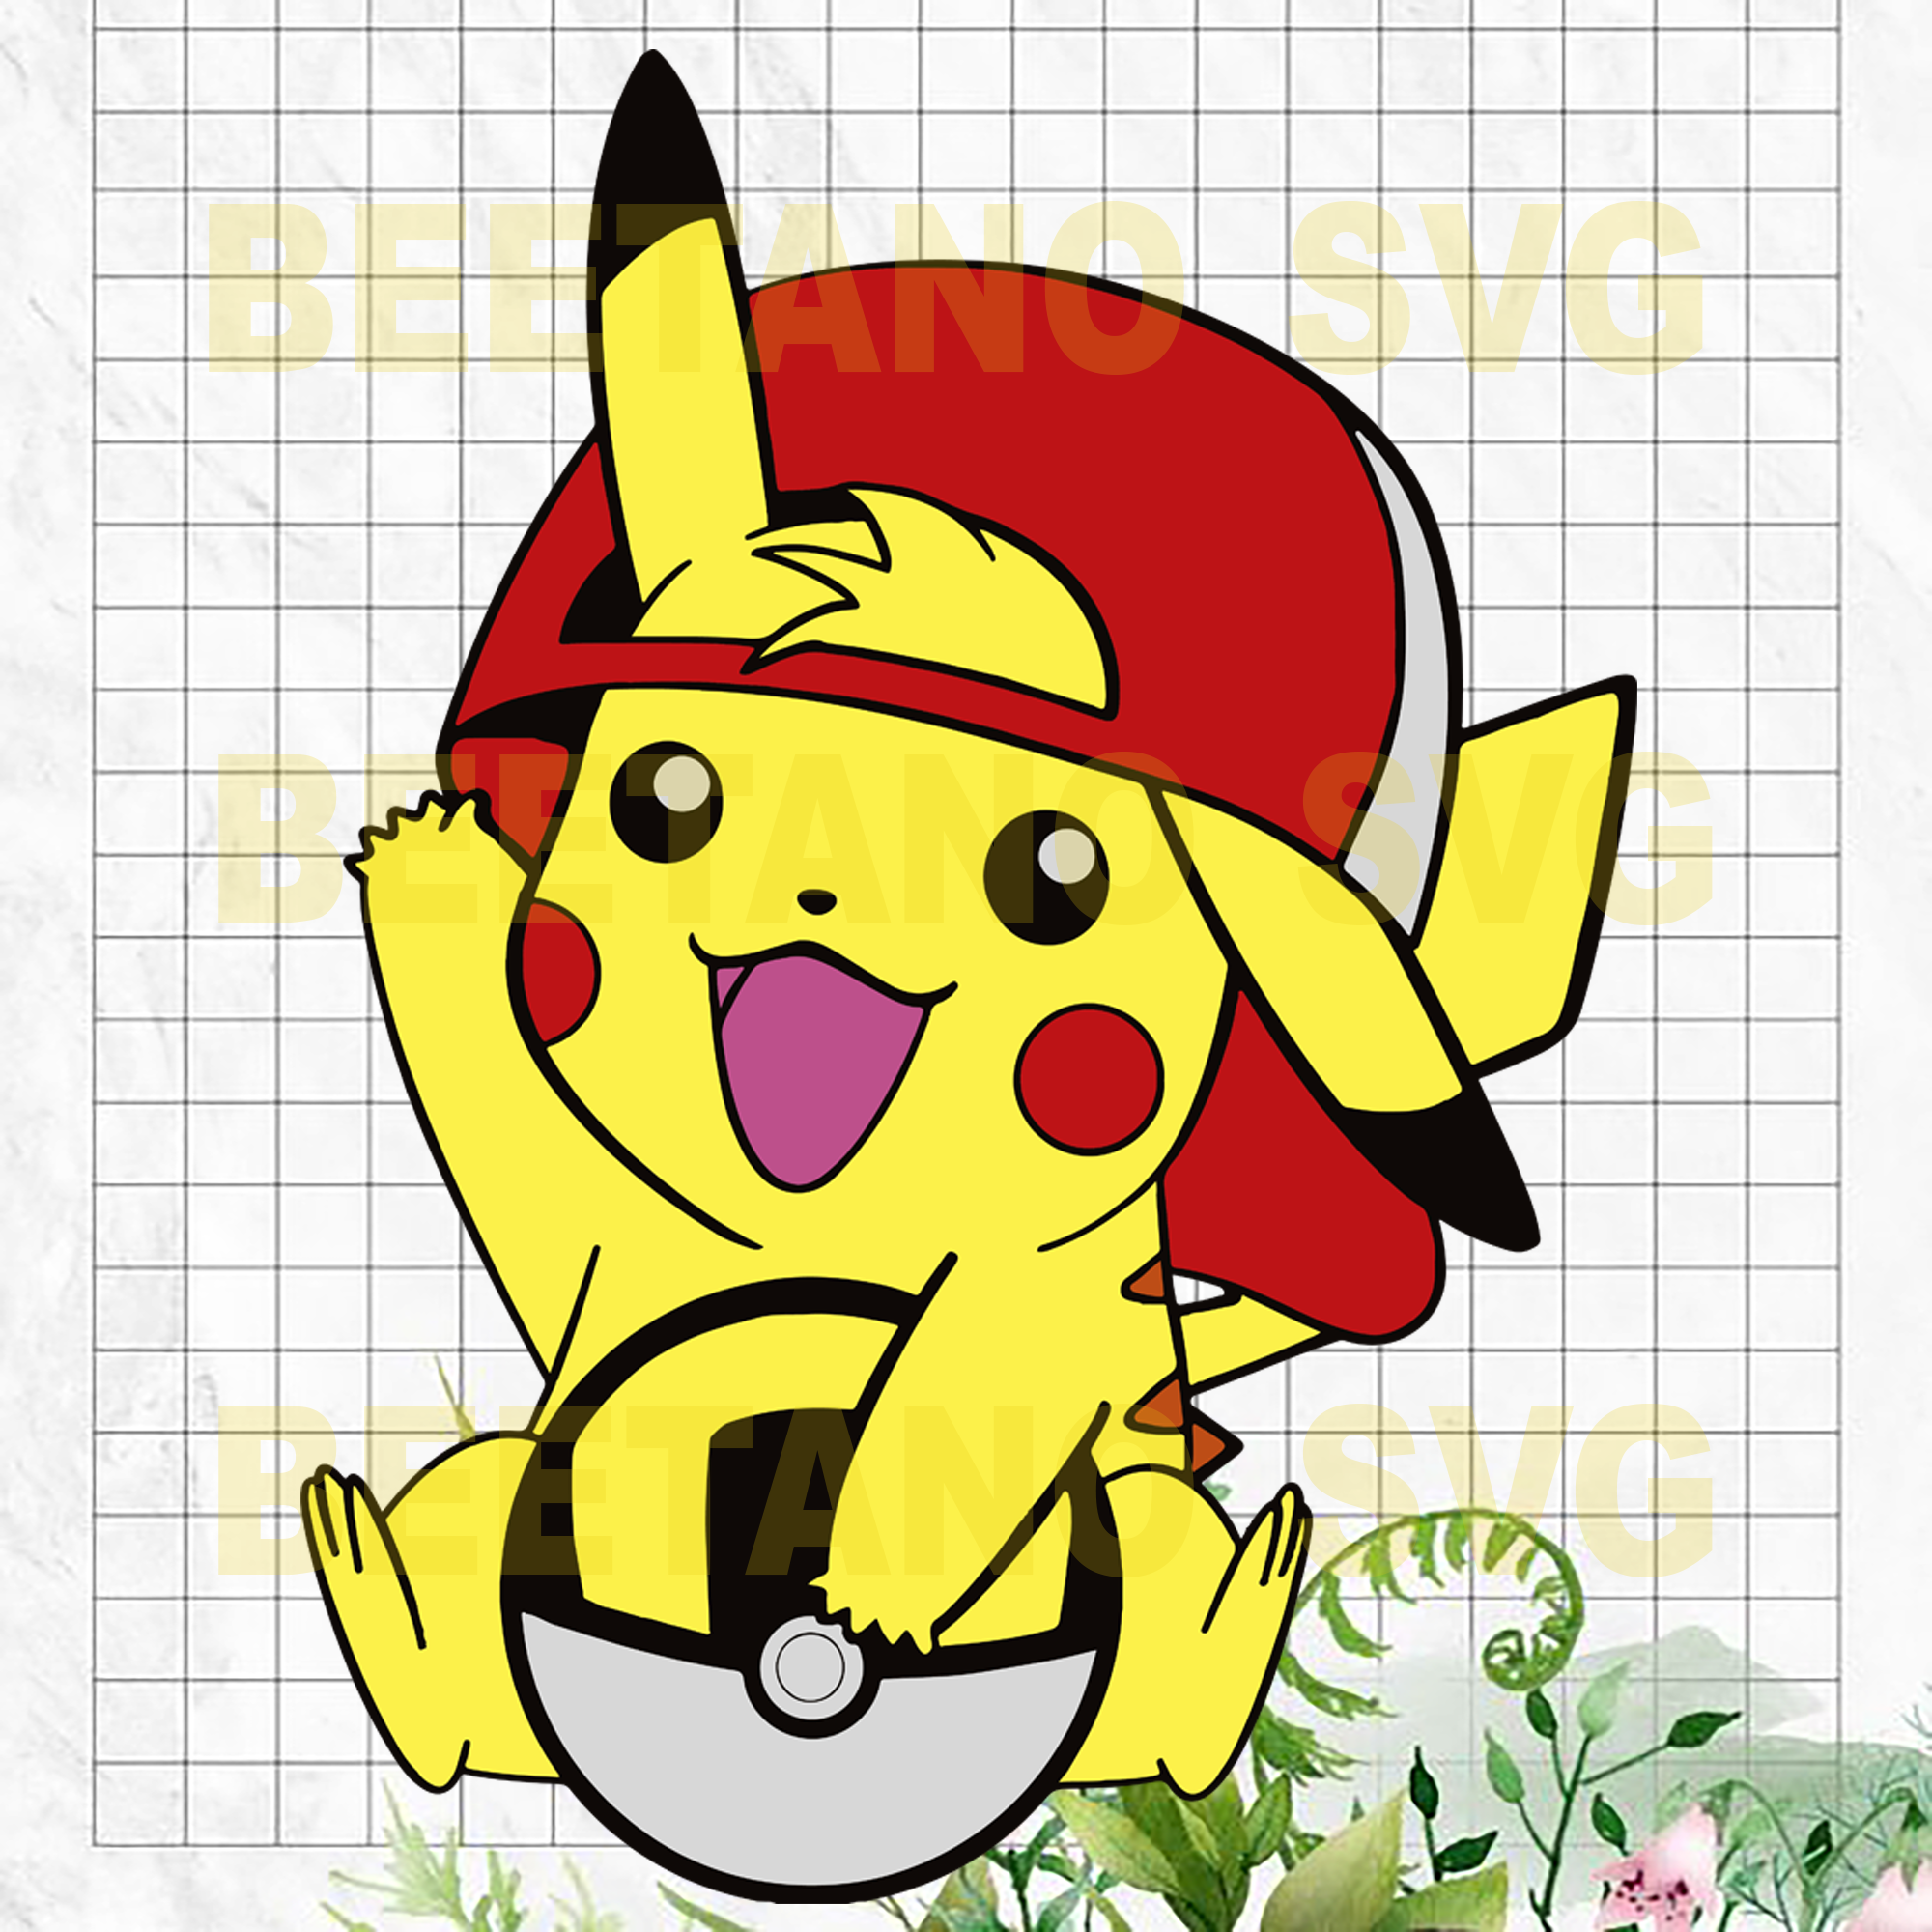 Download Pikachu Svg Pokemon Svg Files Pikachu Cutting Files For Cricut Svg Beetanosvg Scalable Vector Graphics SVG, PNG, EPS, DXF File